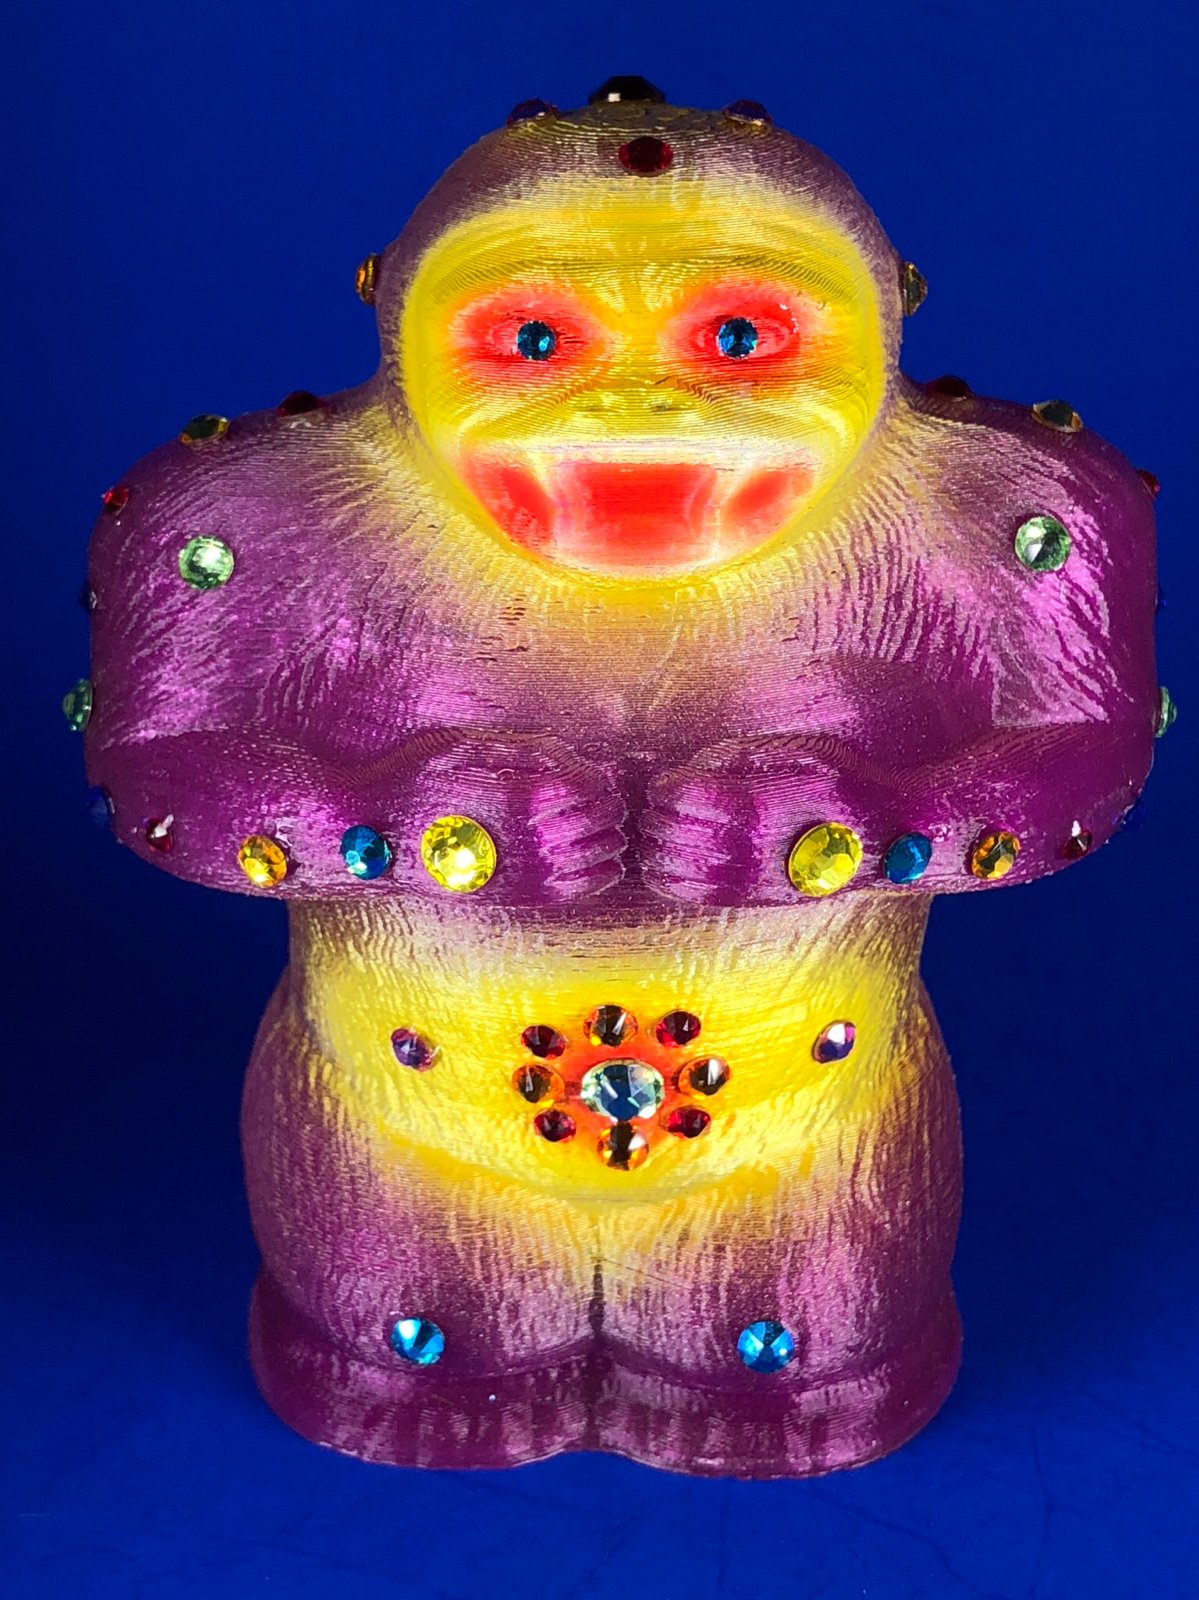 Super squat Ape with 44 rhinestones and a giant eyeball on his back